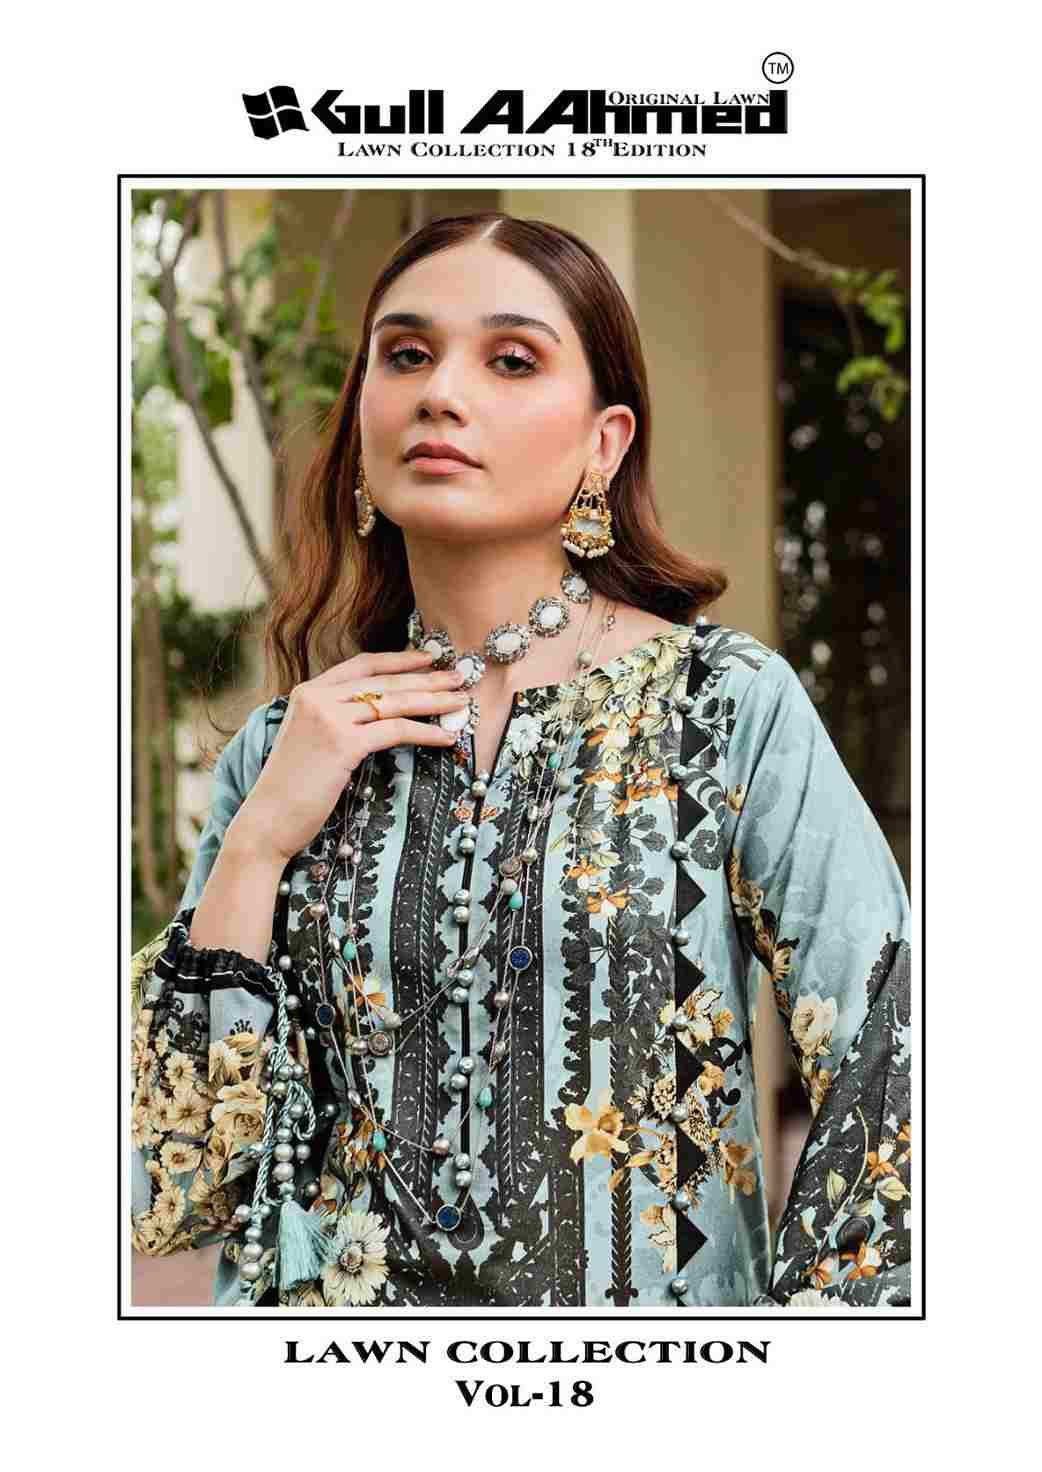 Gull Aahmed Lawn Collection Vol-18 By Gull Aahmed 167 To 172 Series Beautiful Festive Suits Stylish Fancy Colorful Casual Wear & Ethnic Wear Pure Lawn Cotton Dresses At Wholesale Price